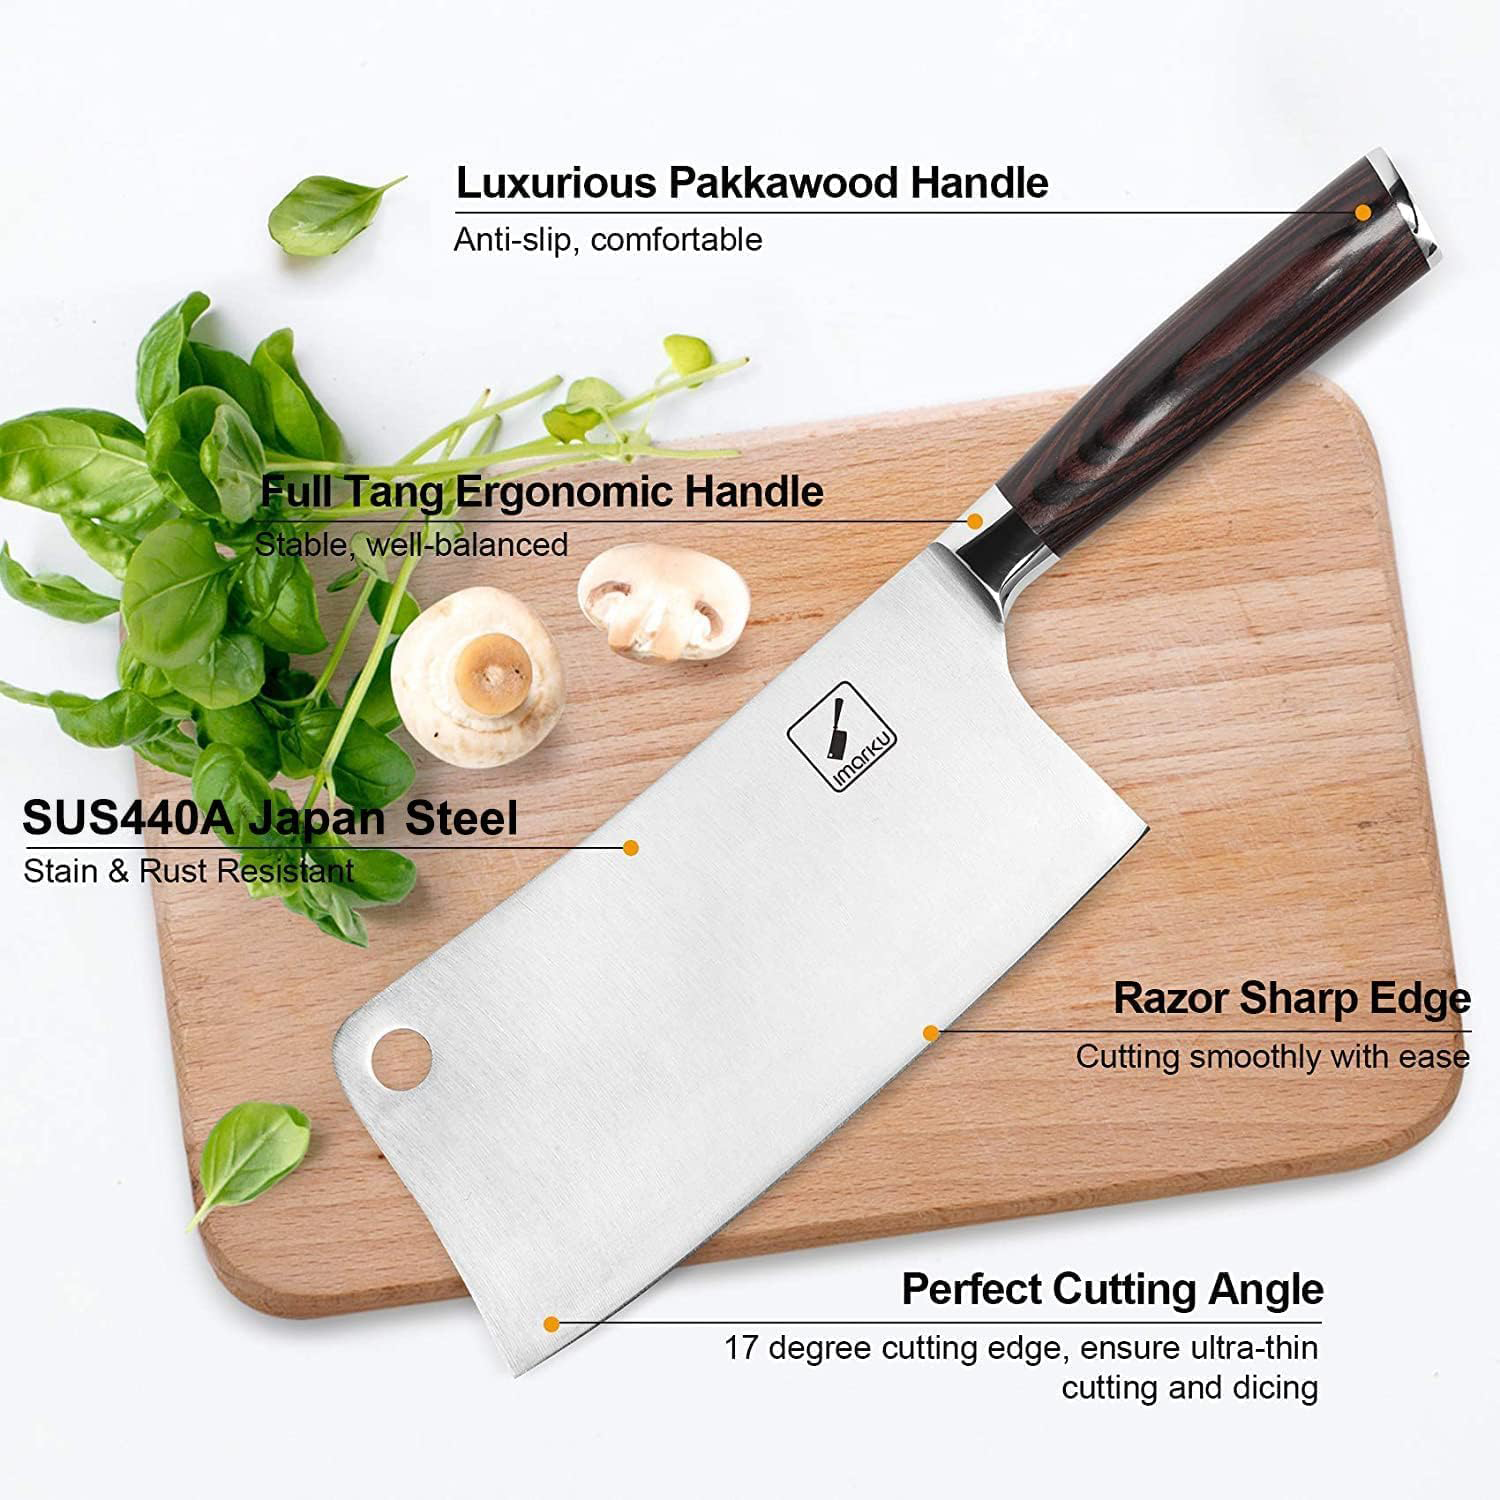 SHI BA ZI ZUO 7.5 Inch Forged Steel Chef Cleaver Vegetable Knife with  Sturdy Full Tang Pakka Wood Handle Built for Daily and Professional Use